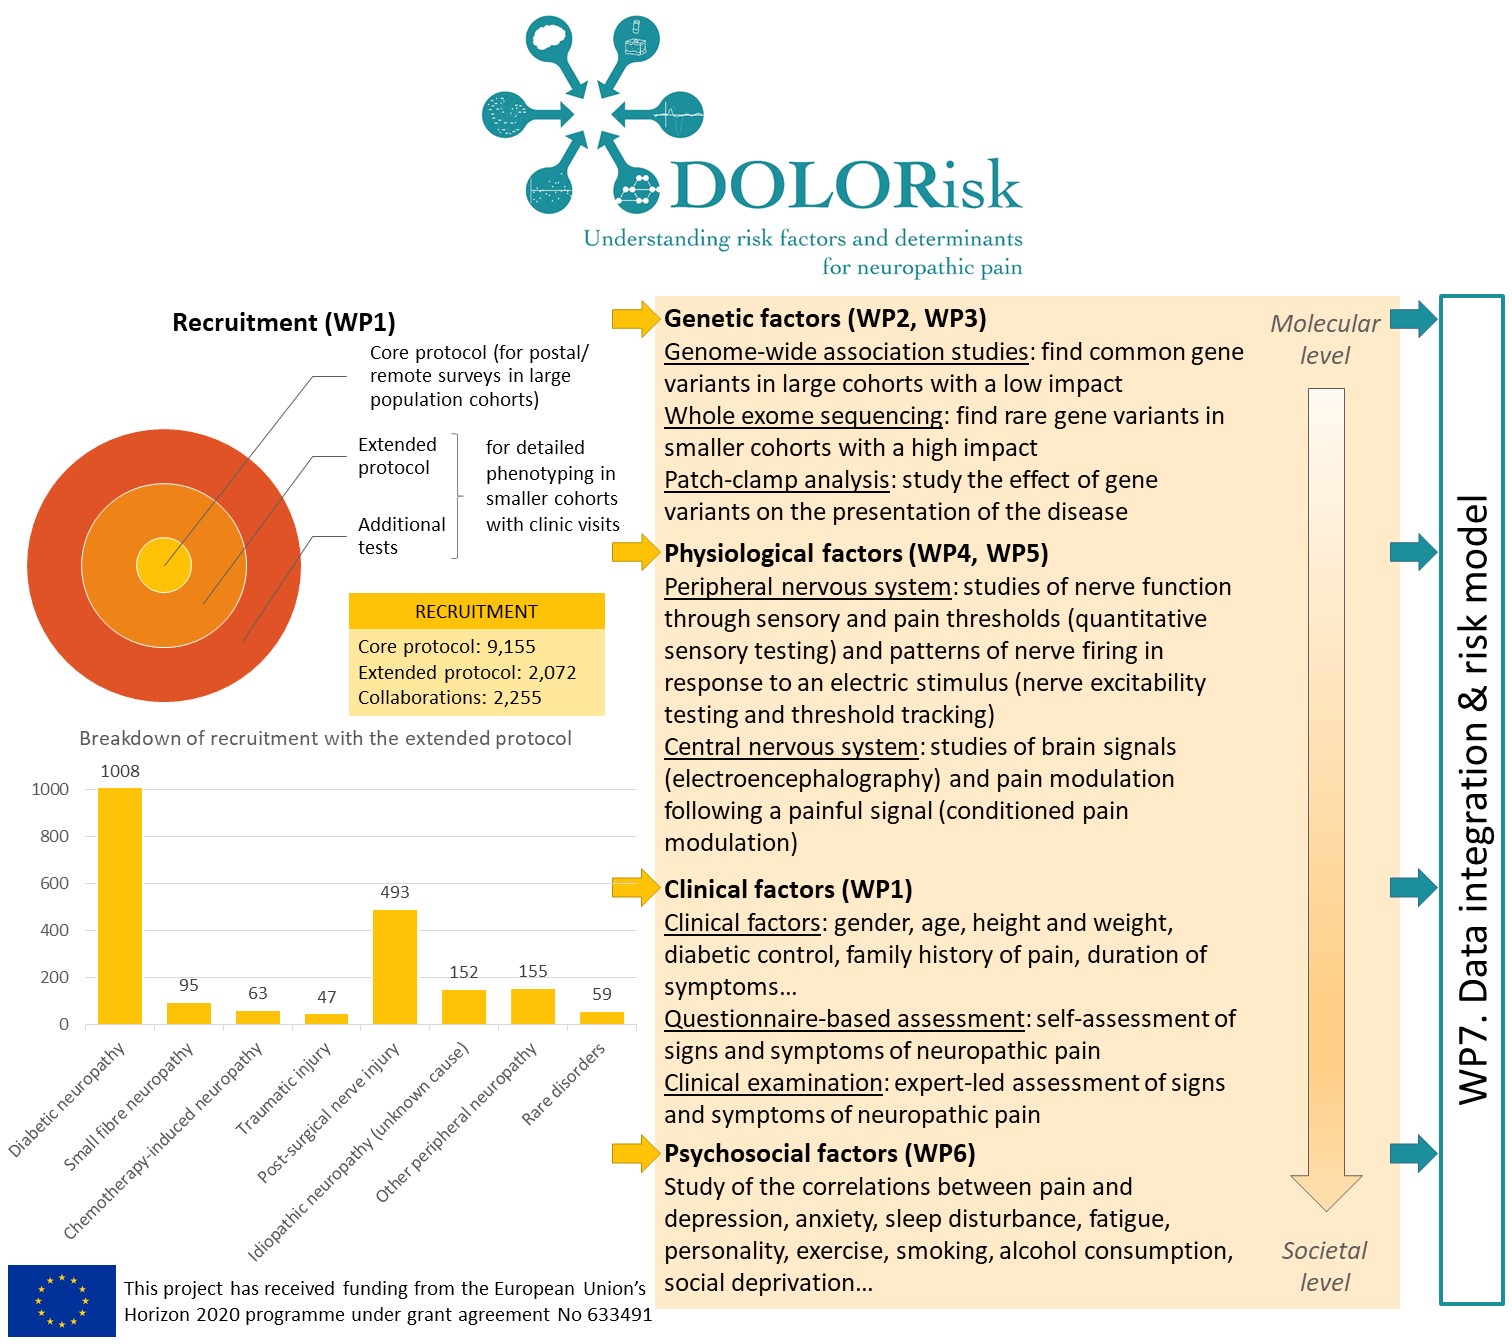 Visual summary of the DOLORisk project, showing the work packages, recruitment numbers, and the different levels of phenotyping (core/extended)